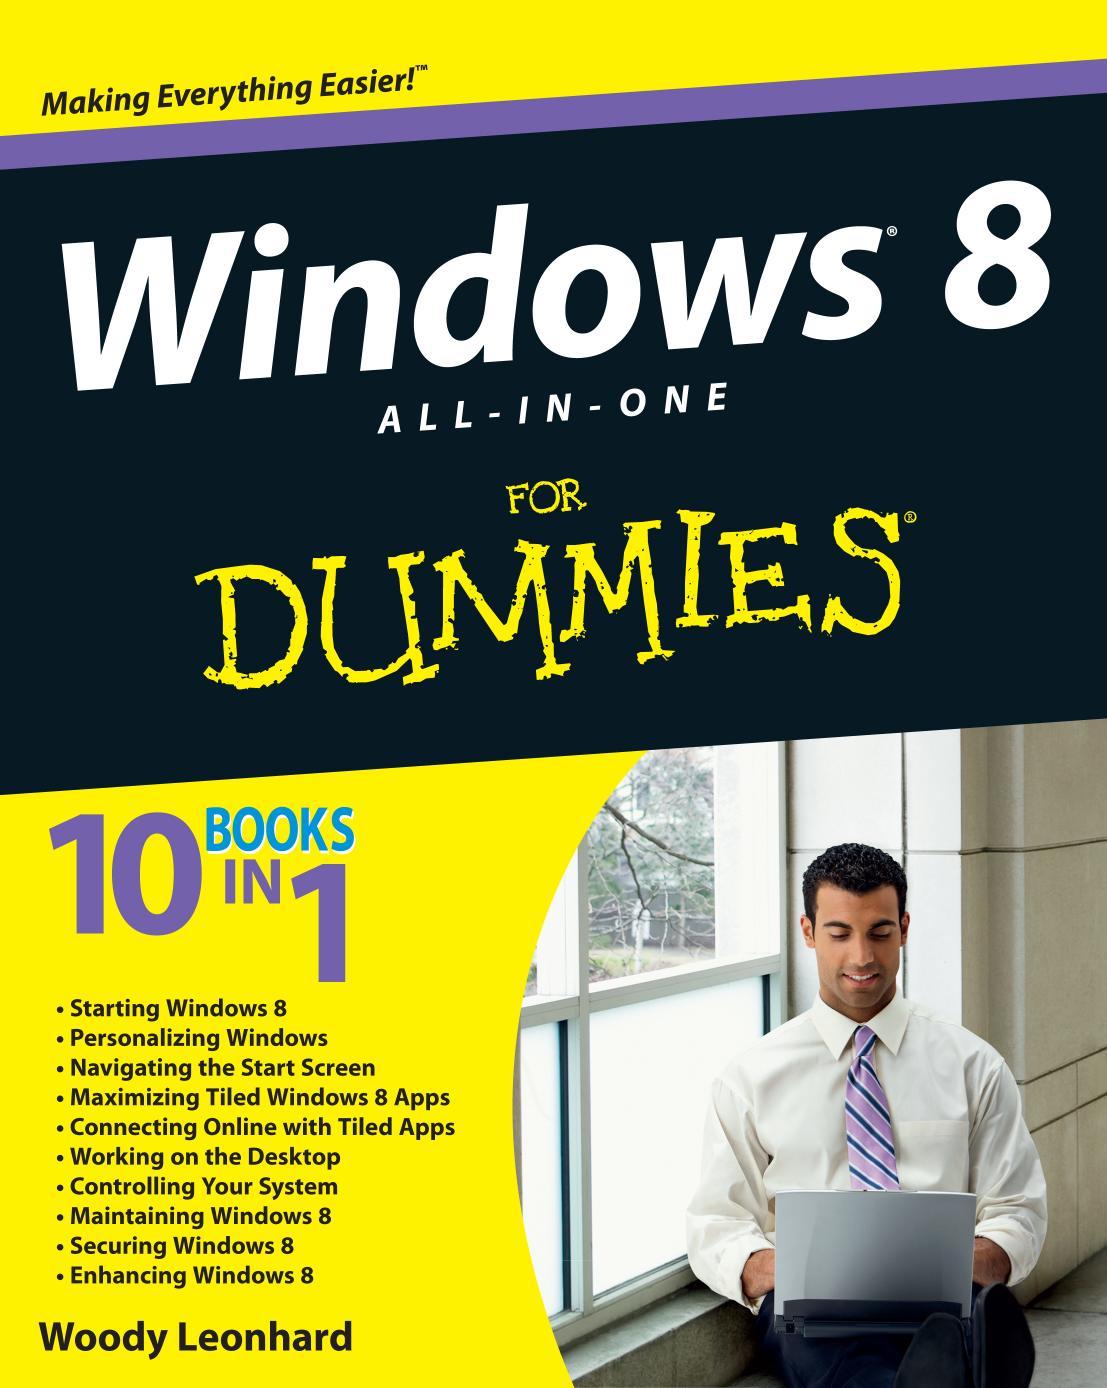 Windows 8 All-in-One For Dummies by Woody Leonhard